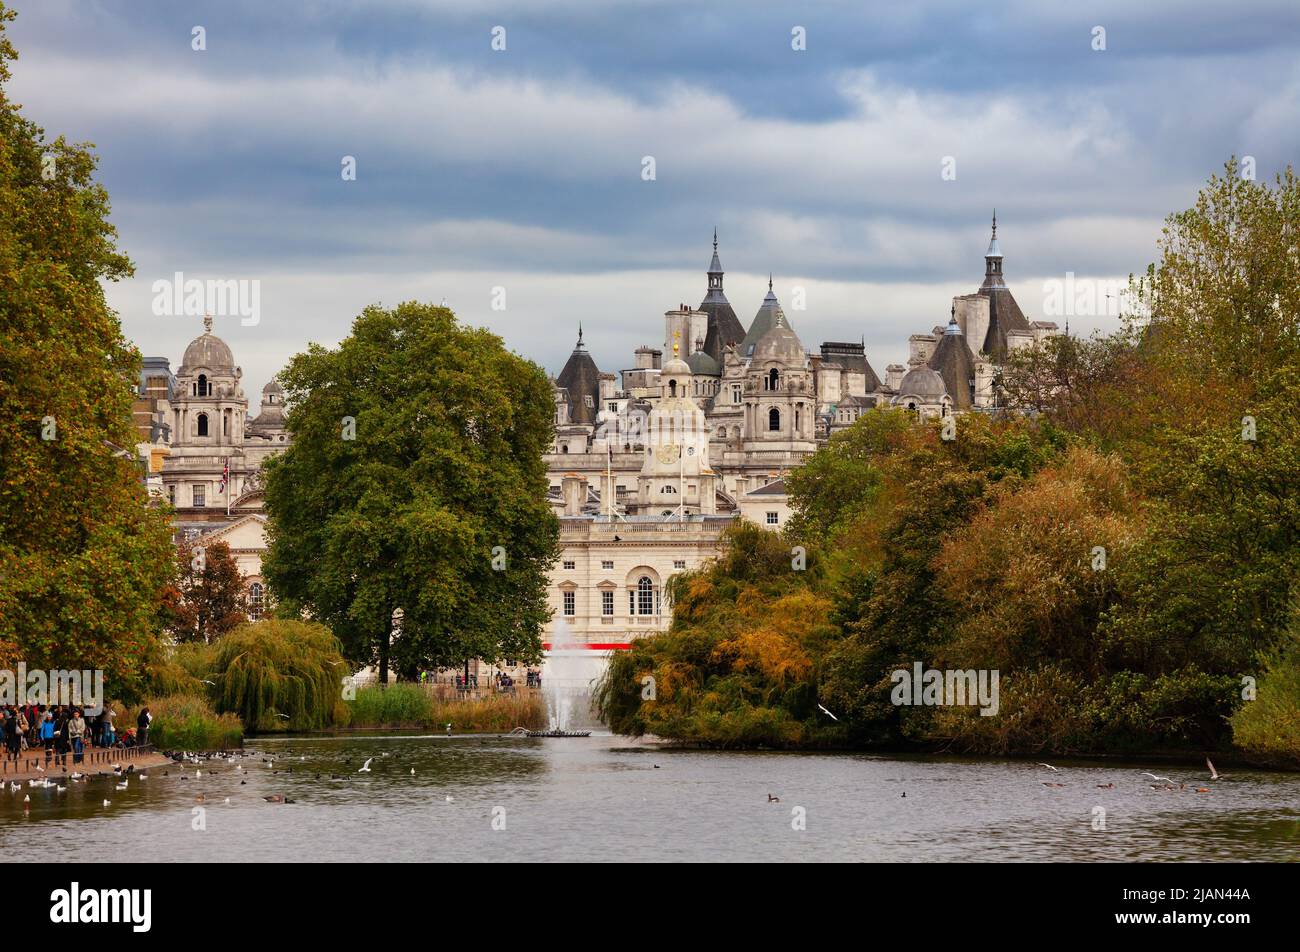 London, UK - Oct 29, 2012: Horse Guards road buildings as seen from the St James's Park Stock Photo